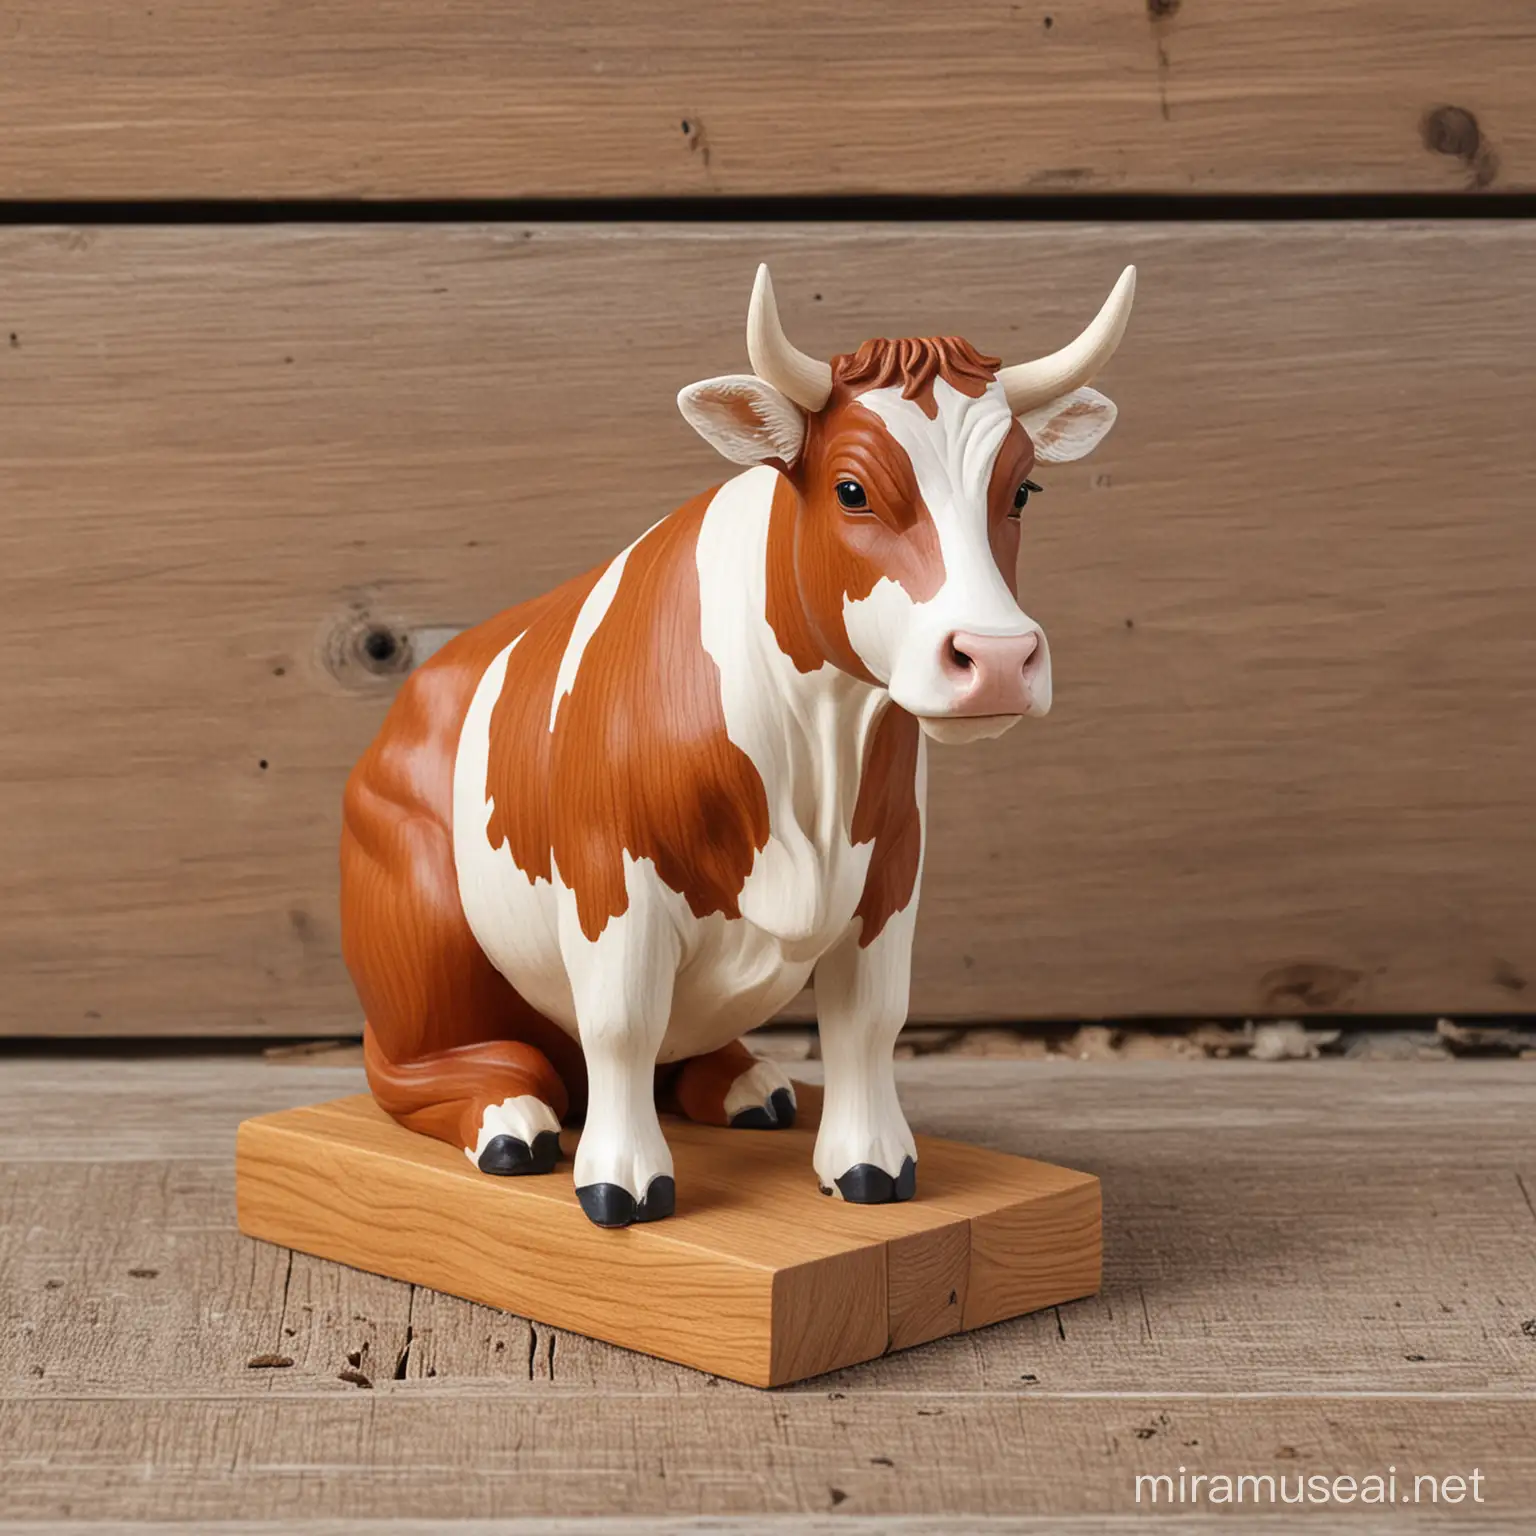 Rustic Wooden Cow Sculpture Sitting in Serene Ambiance